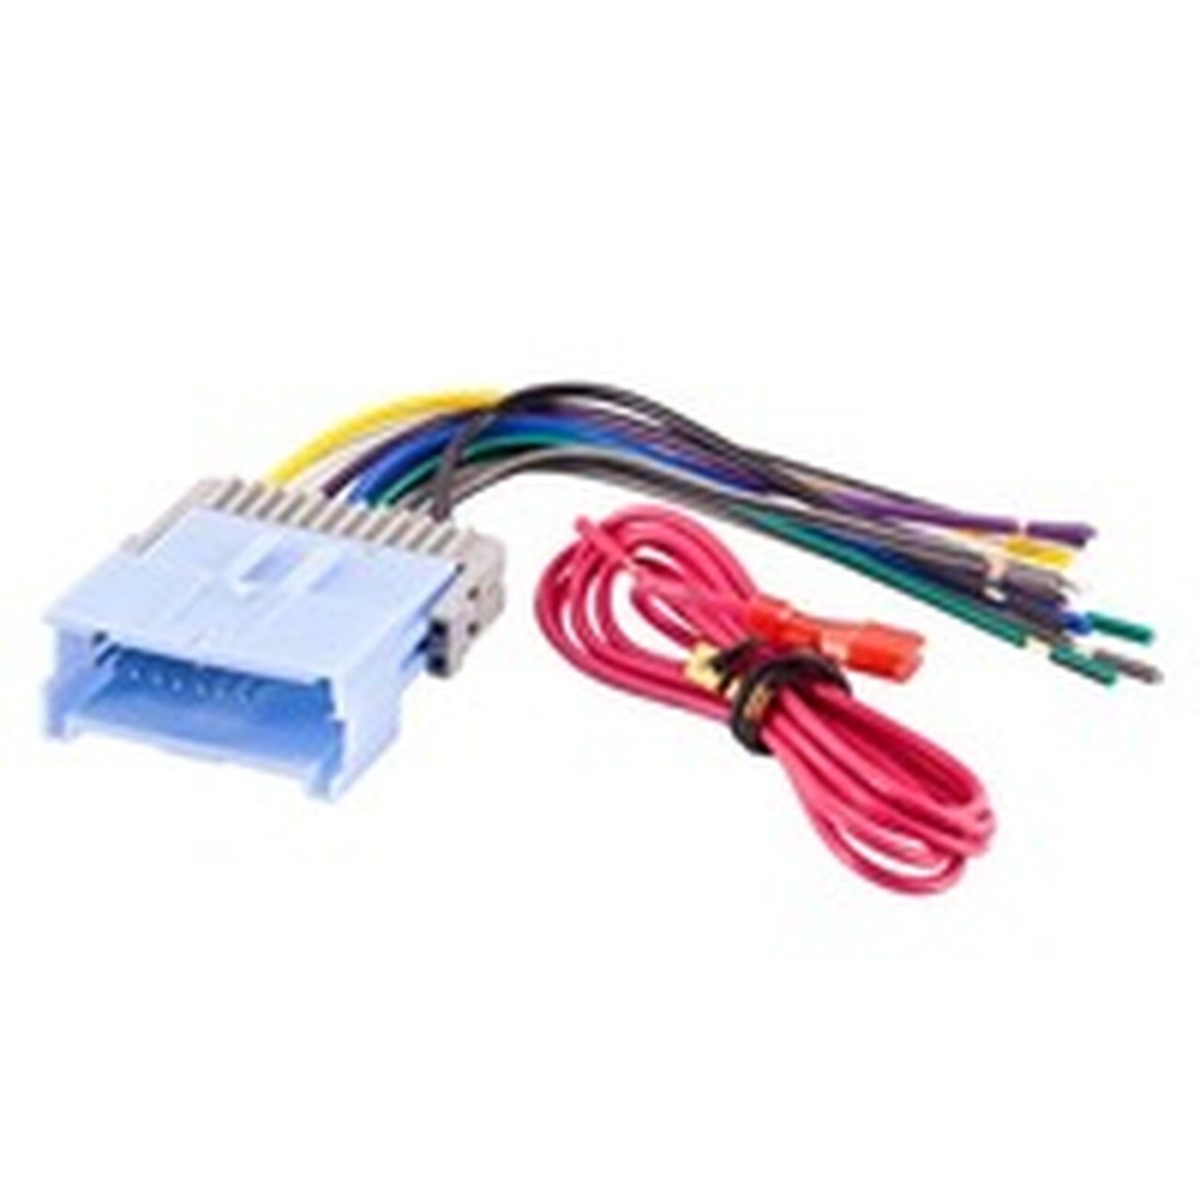 Picture of Metra 70-2103-GM-2103 Car Wiring Harness for 2004 Chevy Malibu Battery